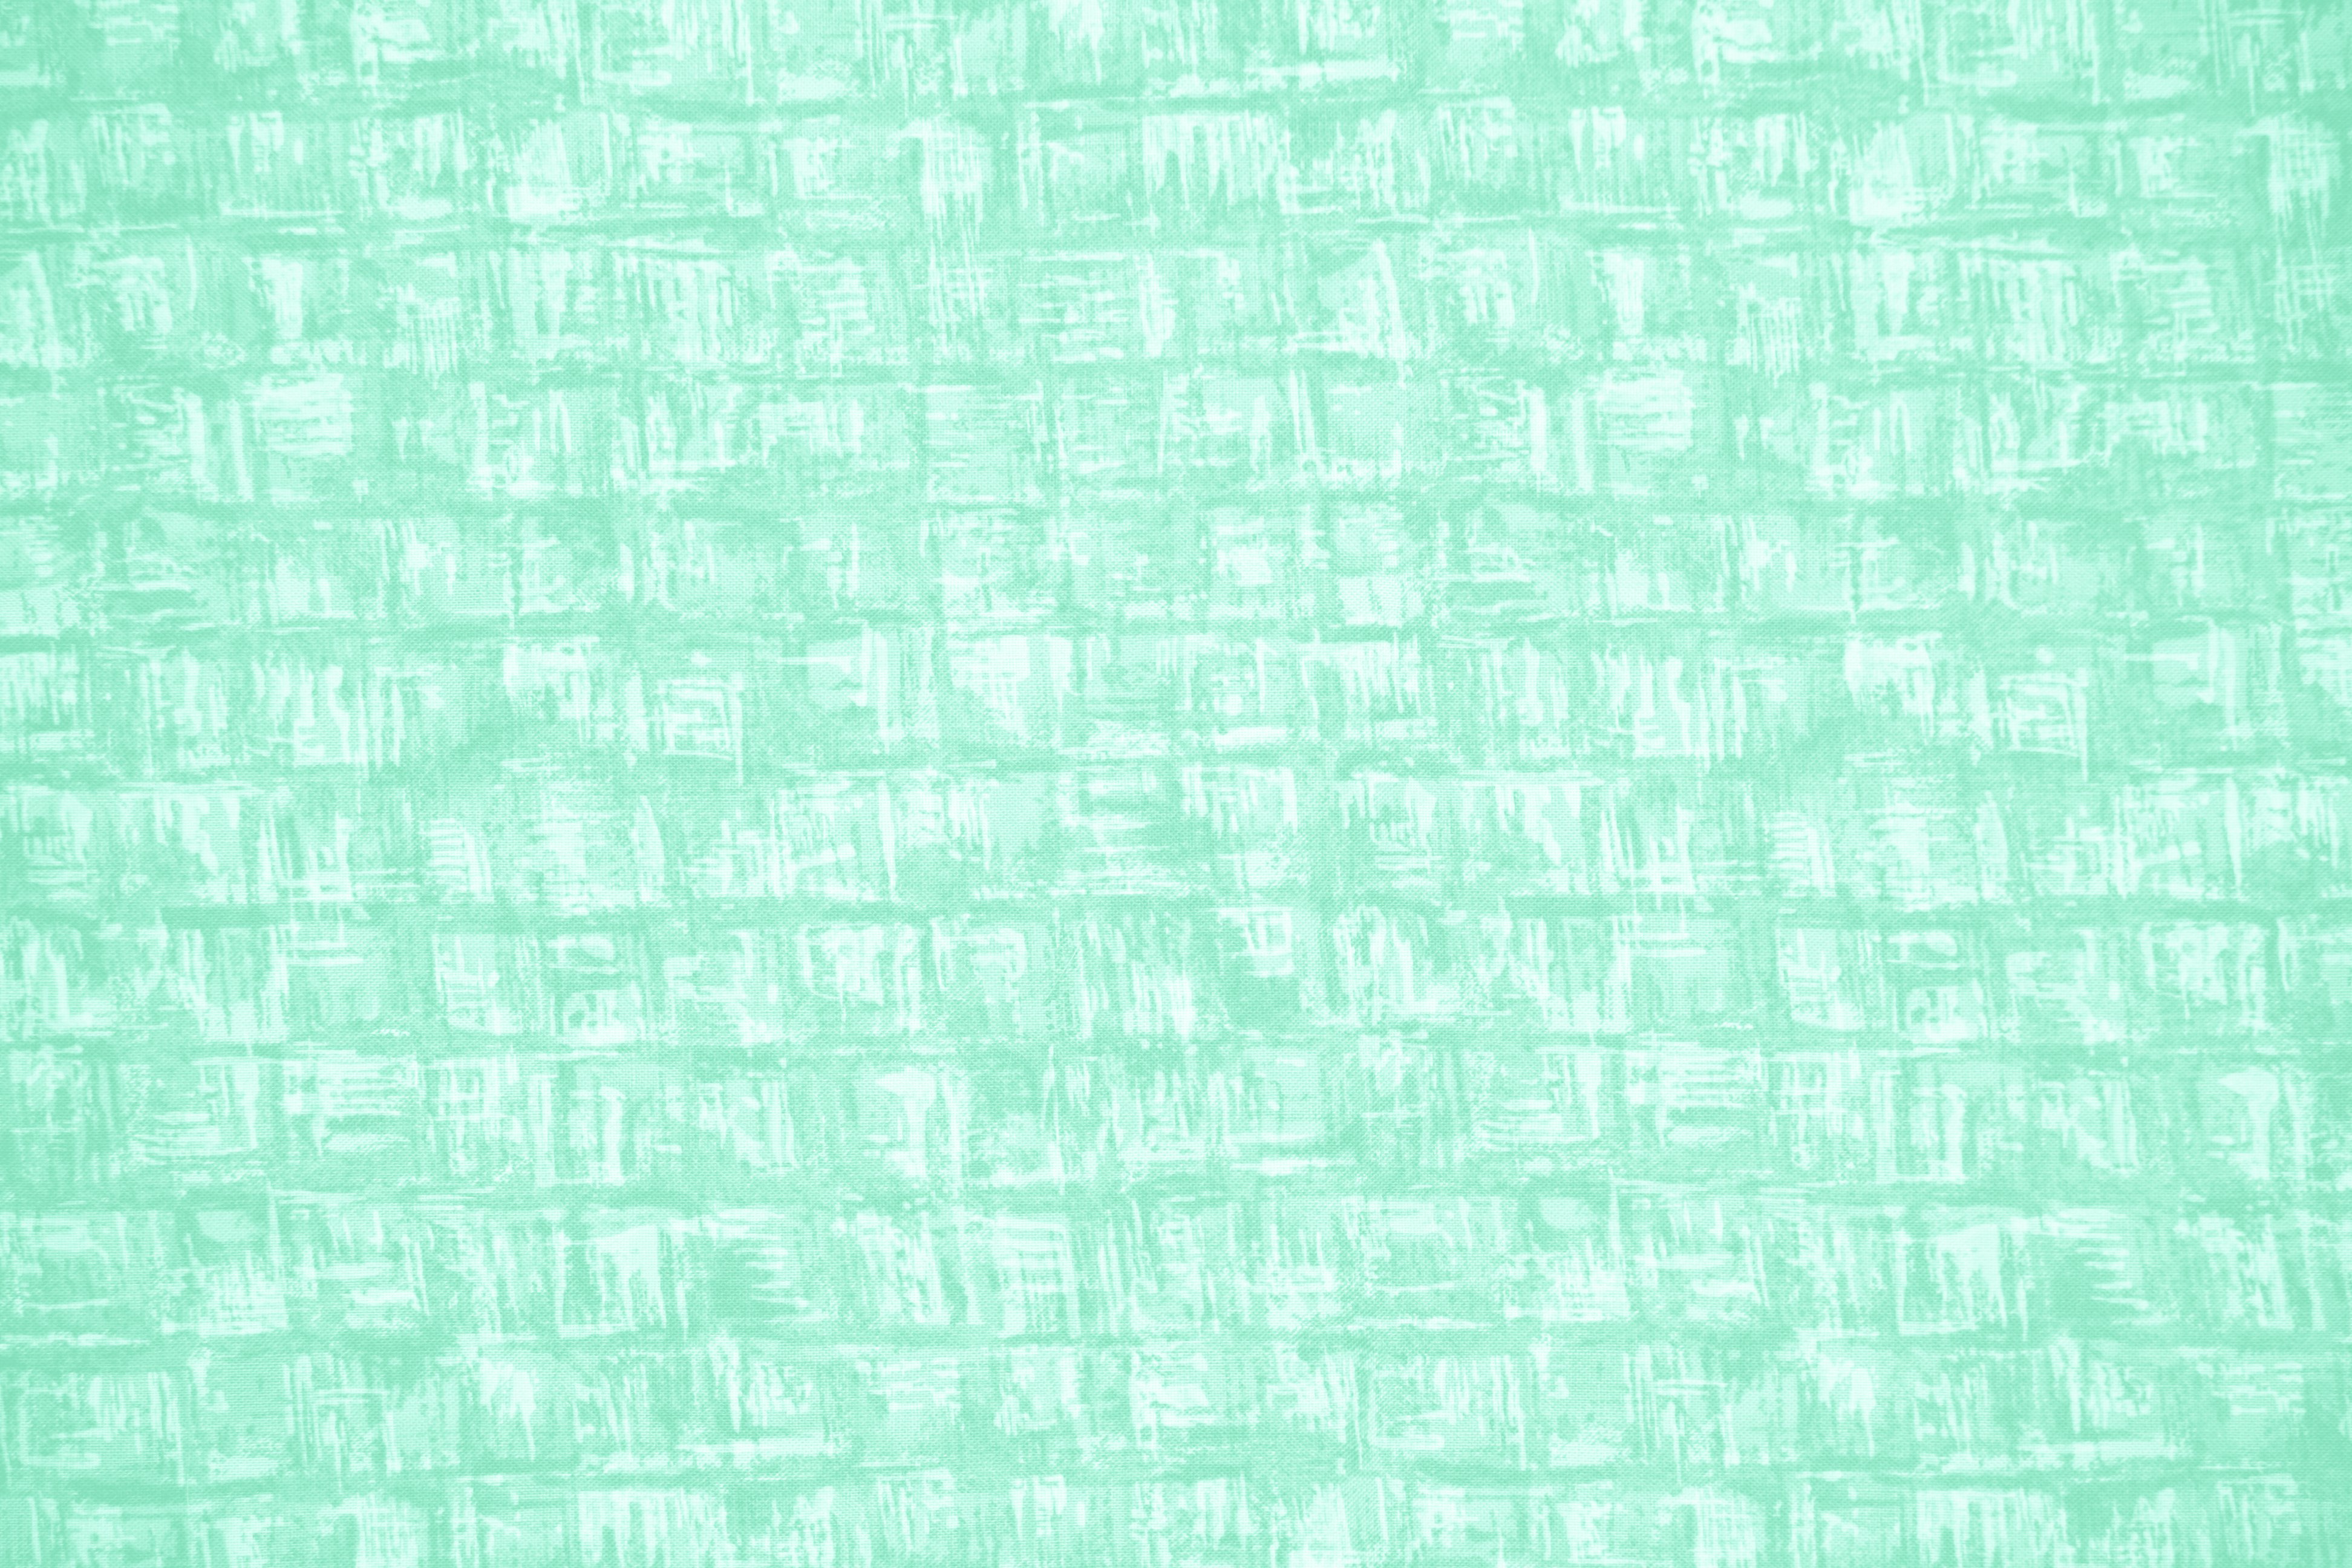 Mint Green Abstract Squares Fabric Texture Picture | Free Photograph ...